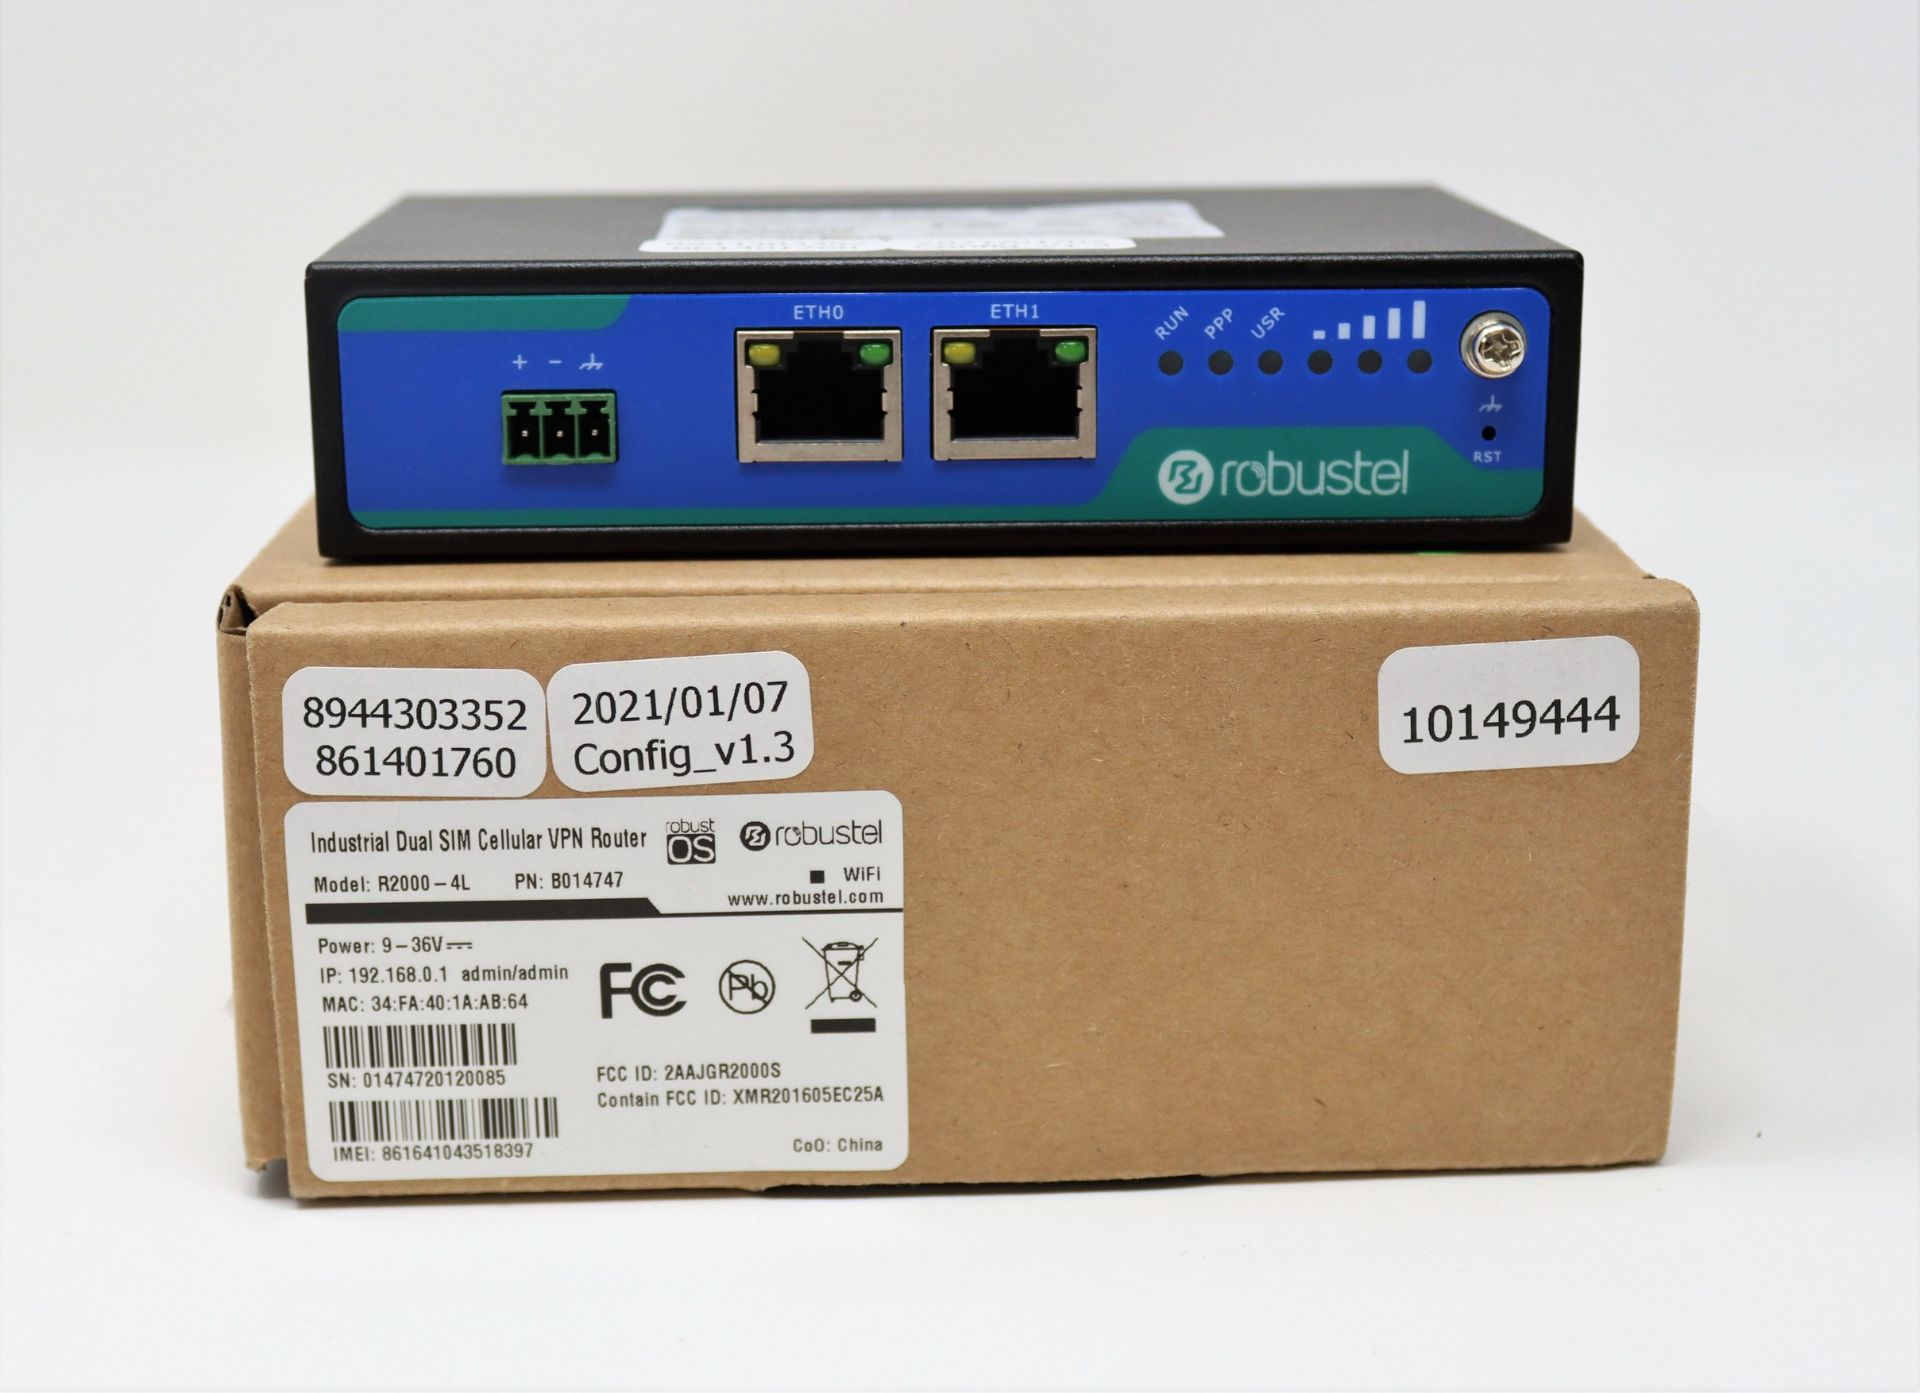 A boxed as new Robustel R2000-4L Industrial Dual SIM Cellular VPN Router (P/N: B014747).